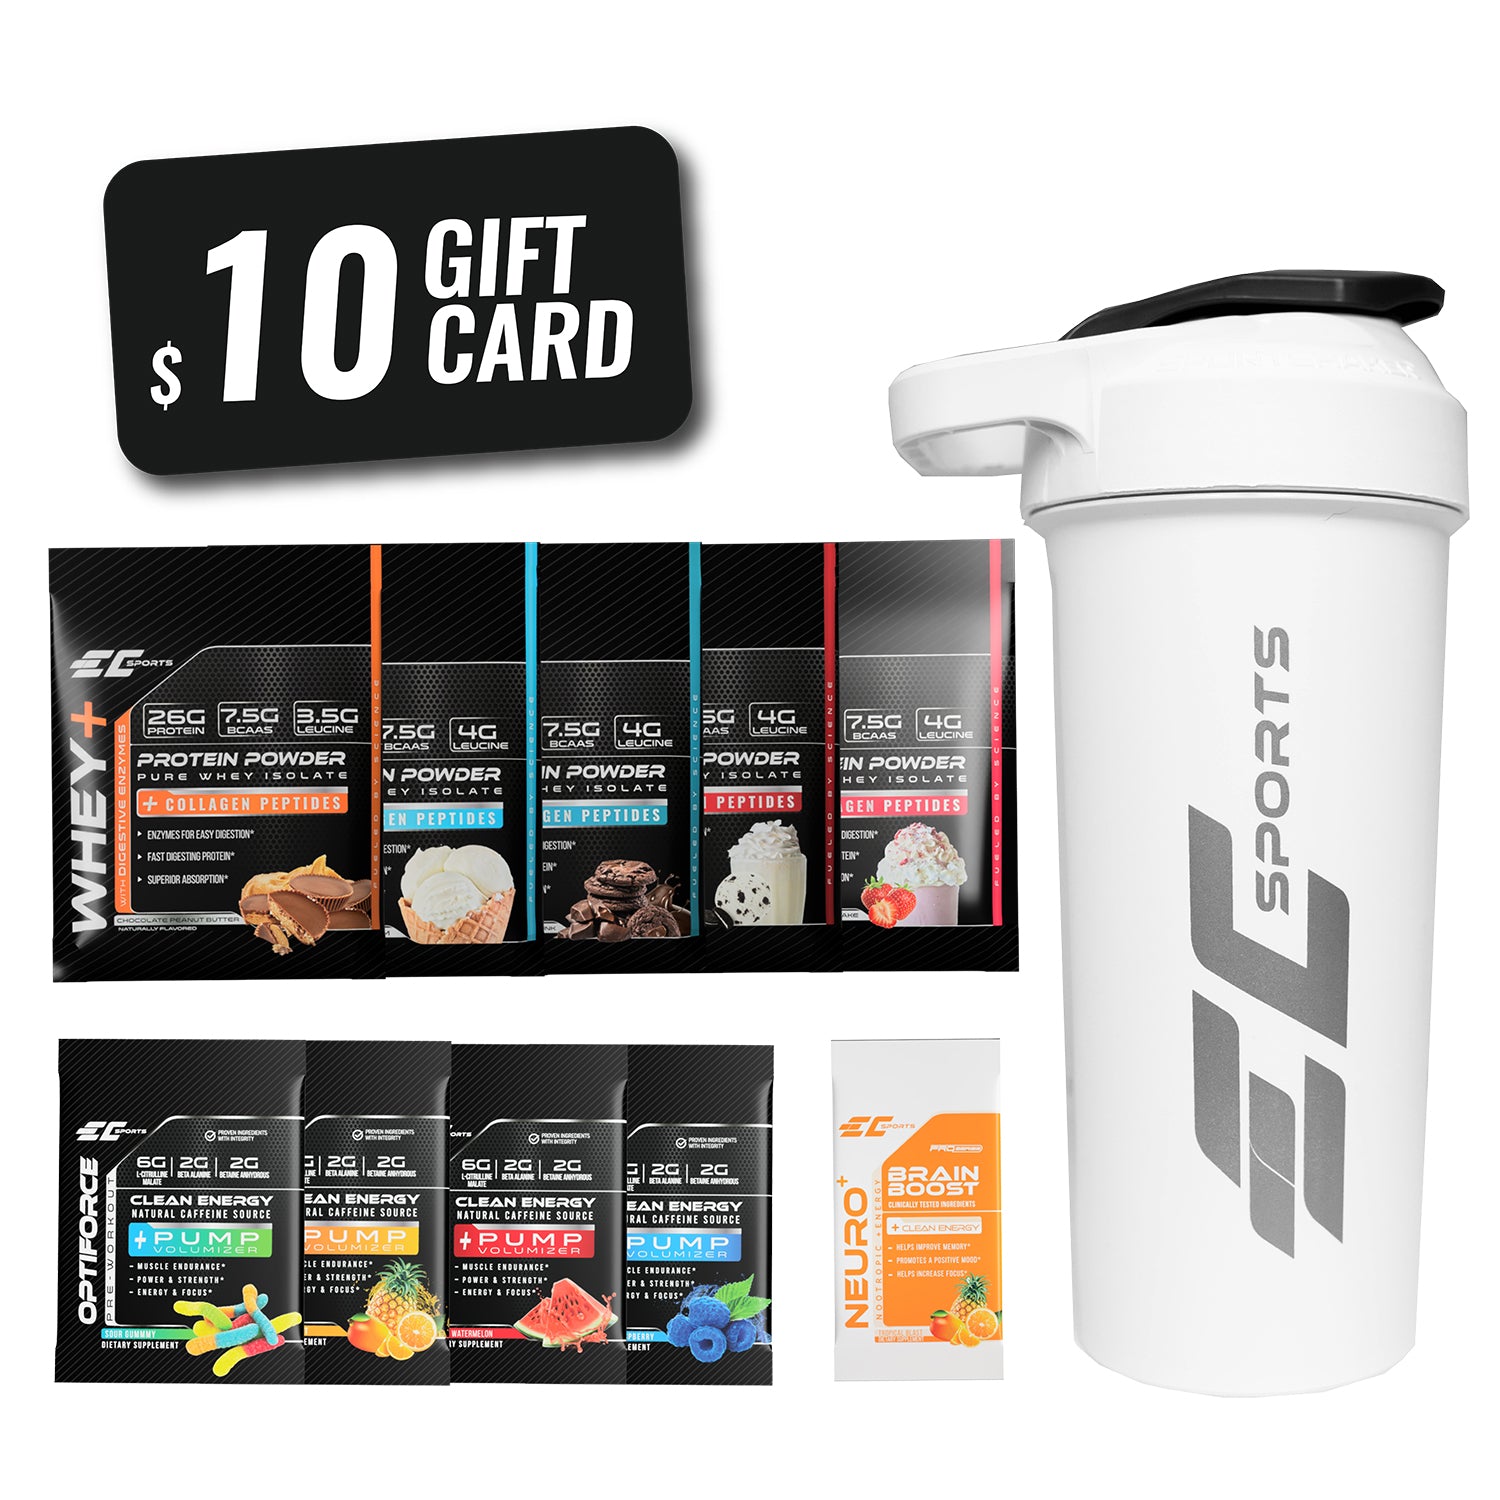 Order our pre-workout samples today and receive a Bonus shaker